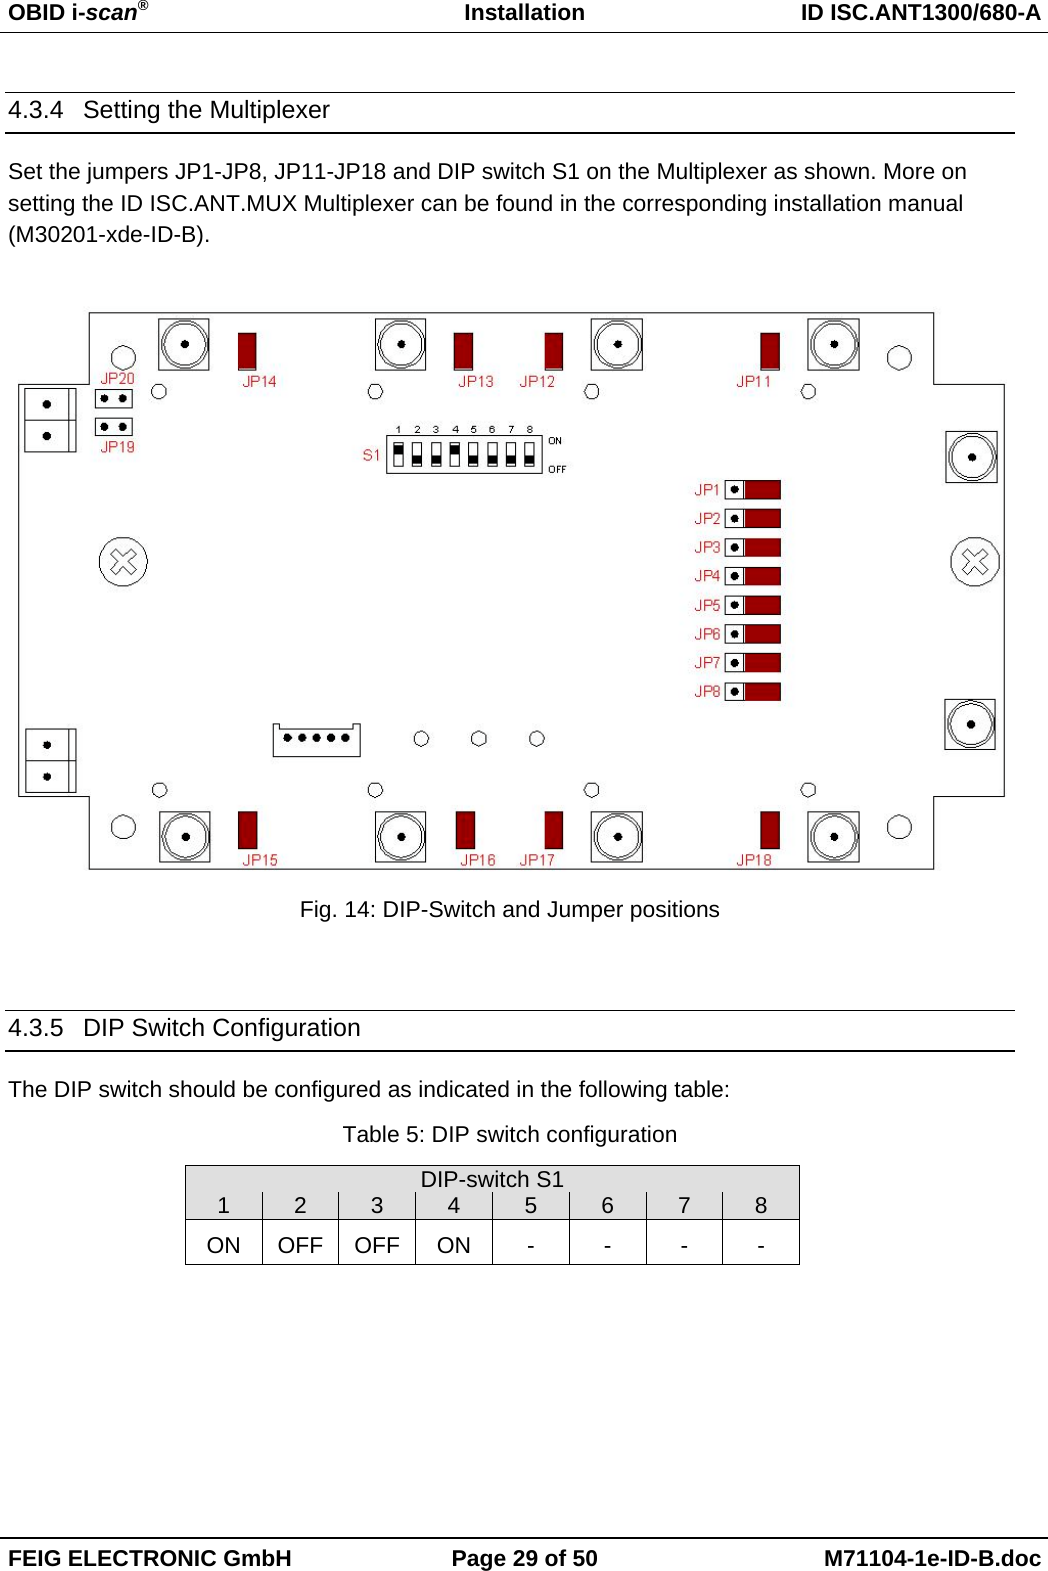 OBID i-scan®Installation ID ISC.ANT1300/680-AFEIG ELECTRONIC GmbH Page 29 of 50 M71104-1e-ID-B.doc4.3.4  Setting the MultiplexerSet the jumpers JP1-JP8, JP11-JP18 and DIP switch S1 on the Multiplexer as shown. More onsetting the ID ISC.ANT.MUX Multiplexer can be found in the corresponding installation manual(M30201-xde-ID-B).Fig. 14: DIP-Switch and Jumper positions4.3.5 DIP Switch ConfigurationThe DIP switch should be configured as indicated in the following table:Table 5: DIP switch configurationDIP-switch S112345678ONOFFOFFON----